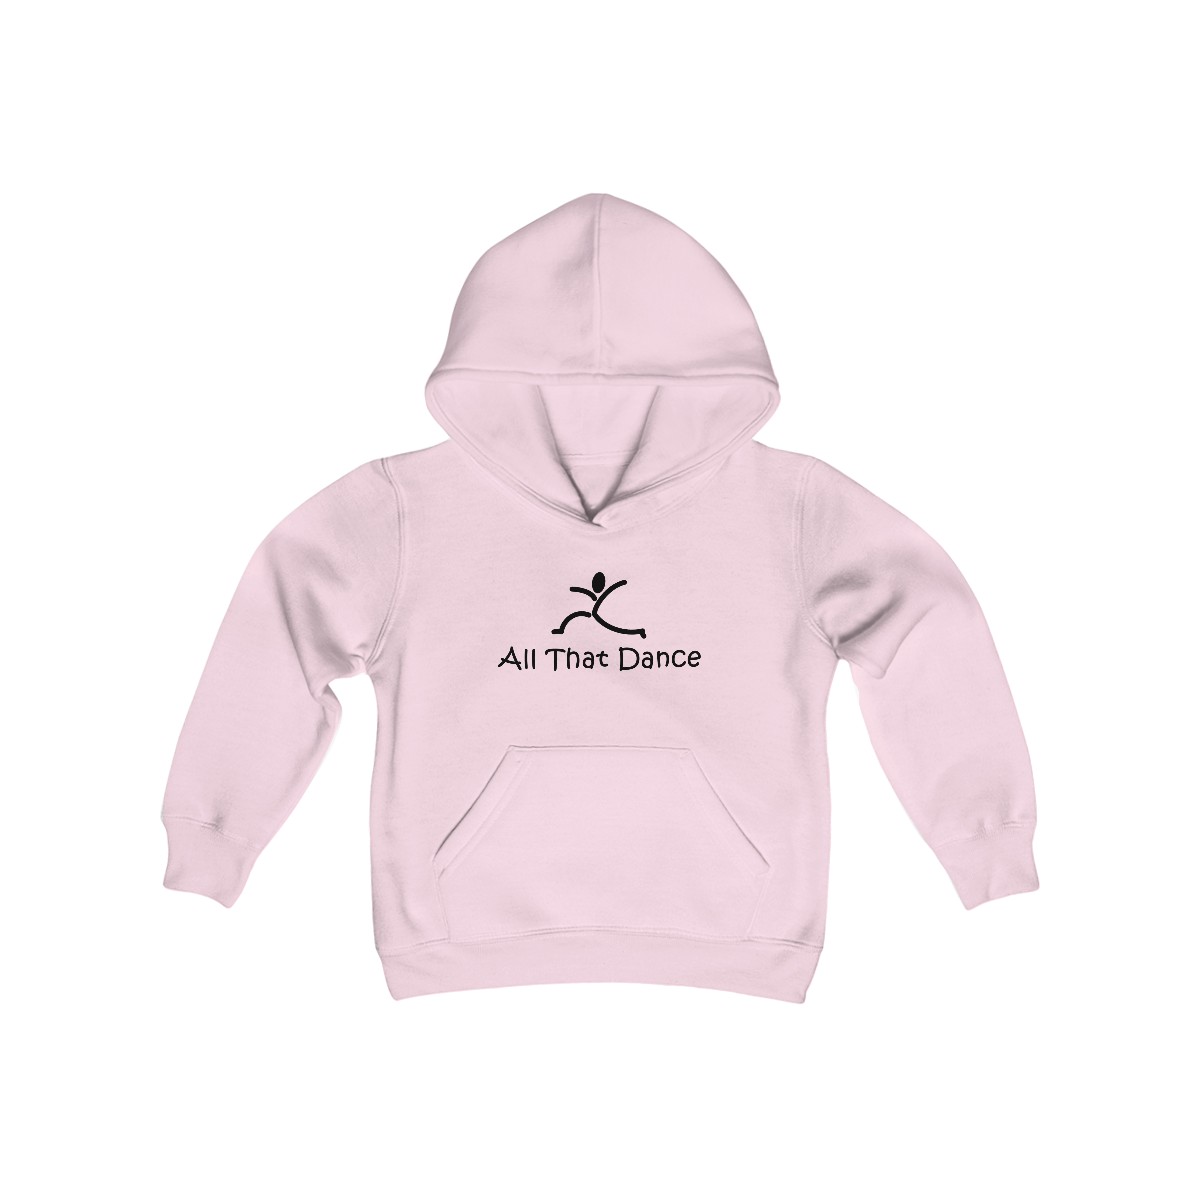 Youth Sizes - All That Dance Hoodies product main image